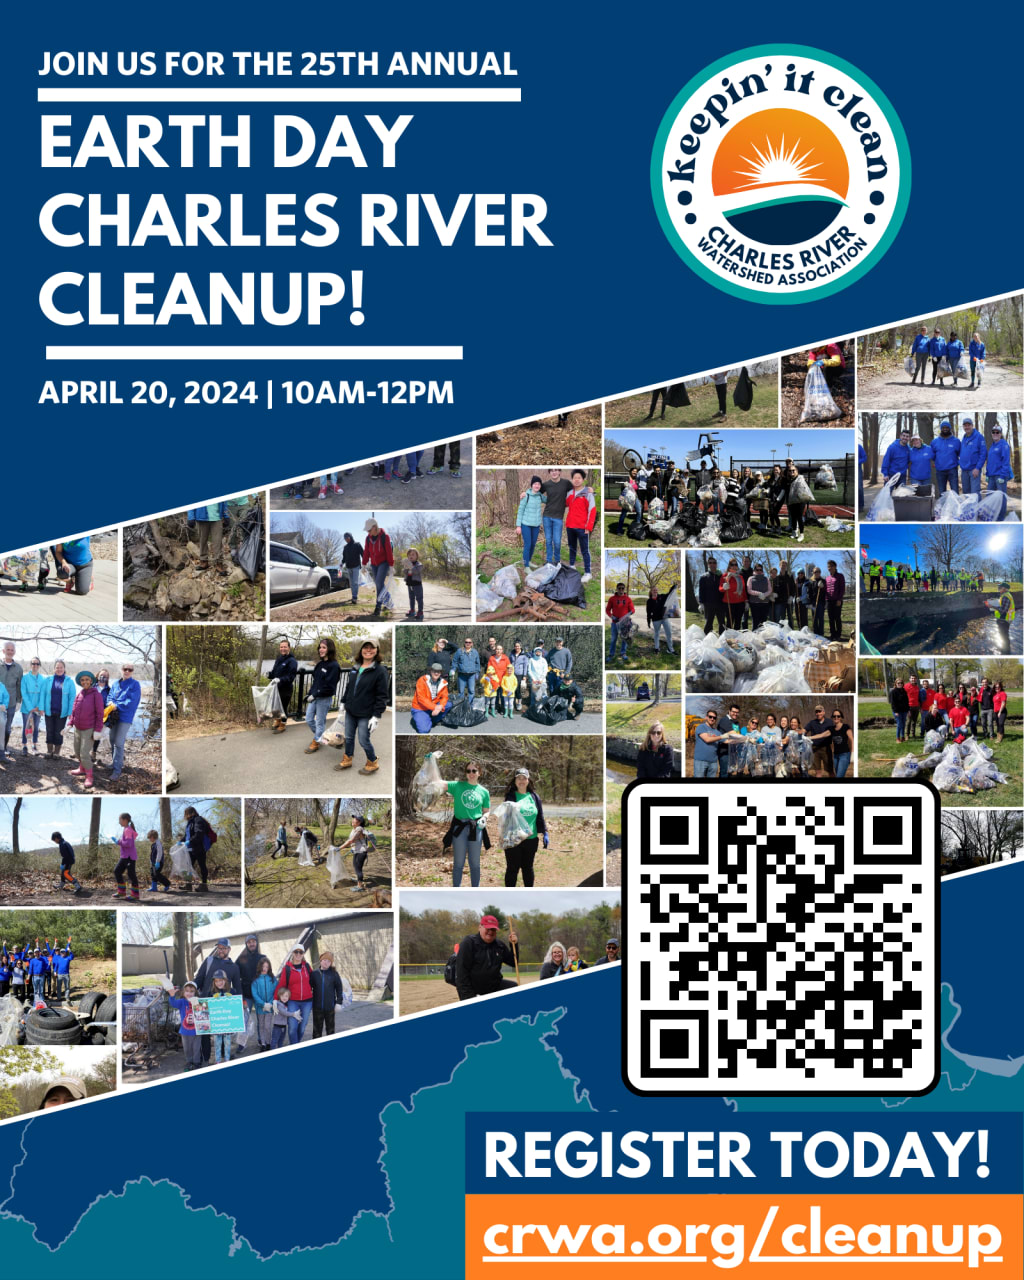 25TH ANNUAL CHARLES RIVER EARTH DAY CLEANUP [04/20/24]